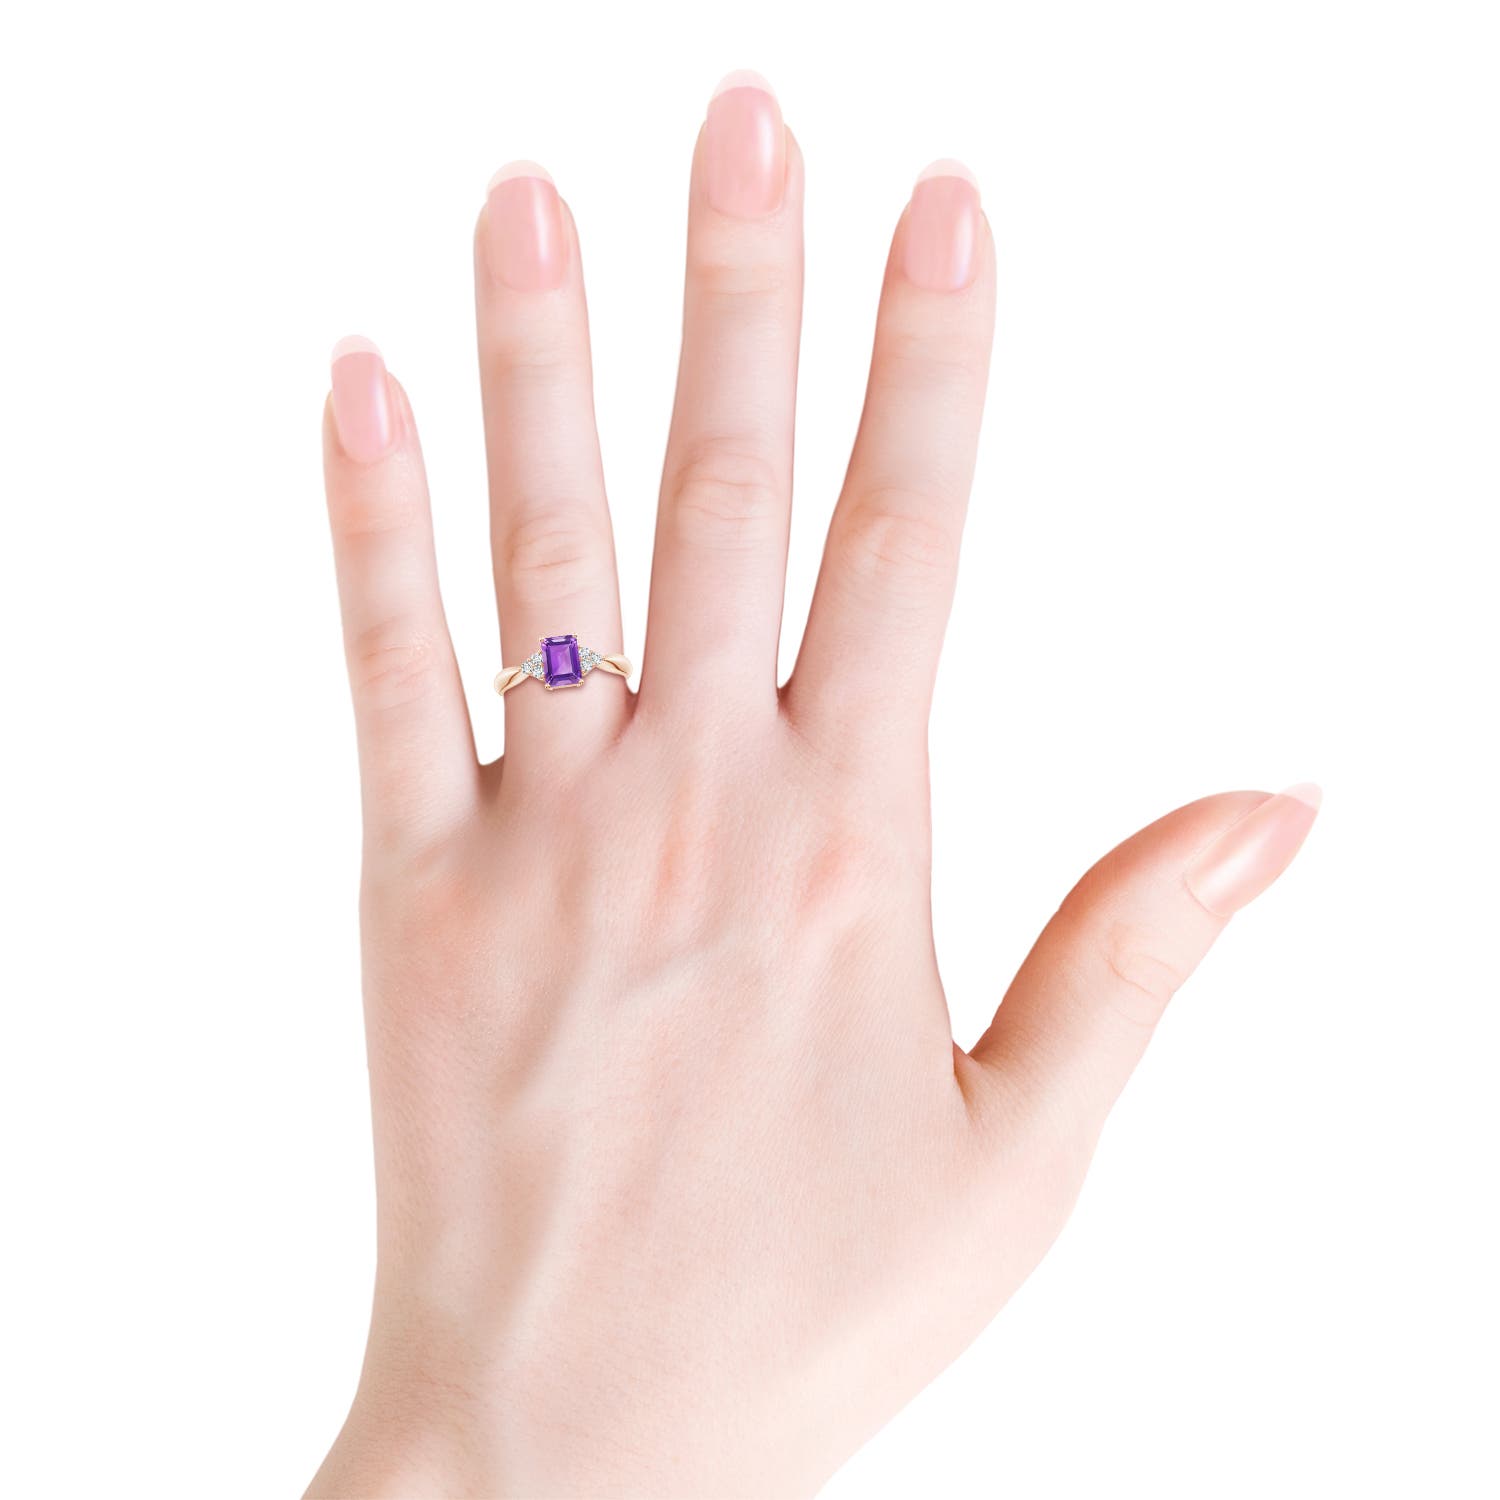 AA - Amethyst / 1.07 CT / 14 KT Rose Gold